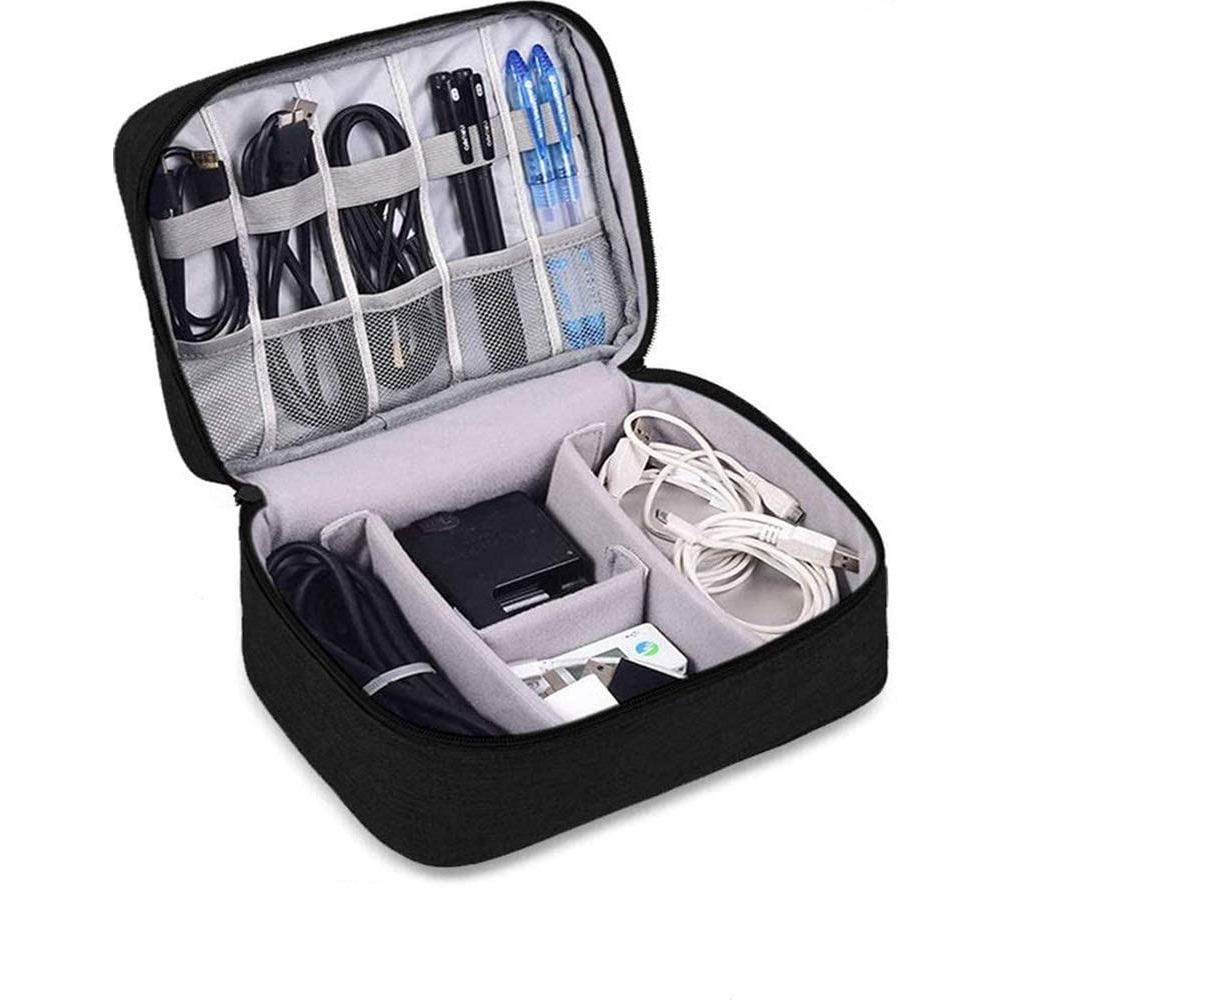 Universal Electronics Accessories Organizer Travel Accessories Cable Cord Gadget Gear Storage bag,Electronics Travel Gadget Organizer Tech Bag 